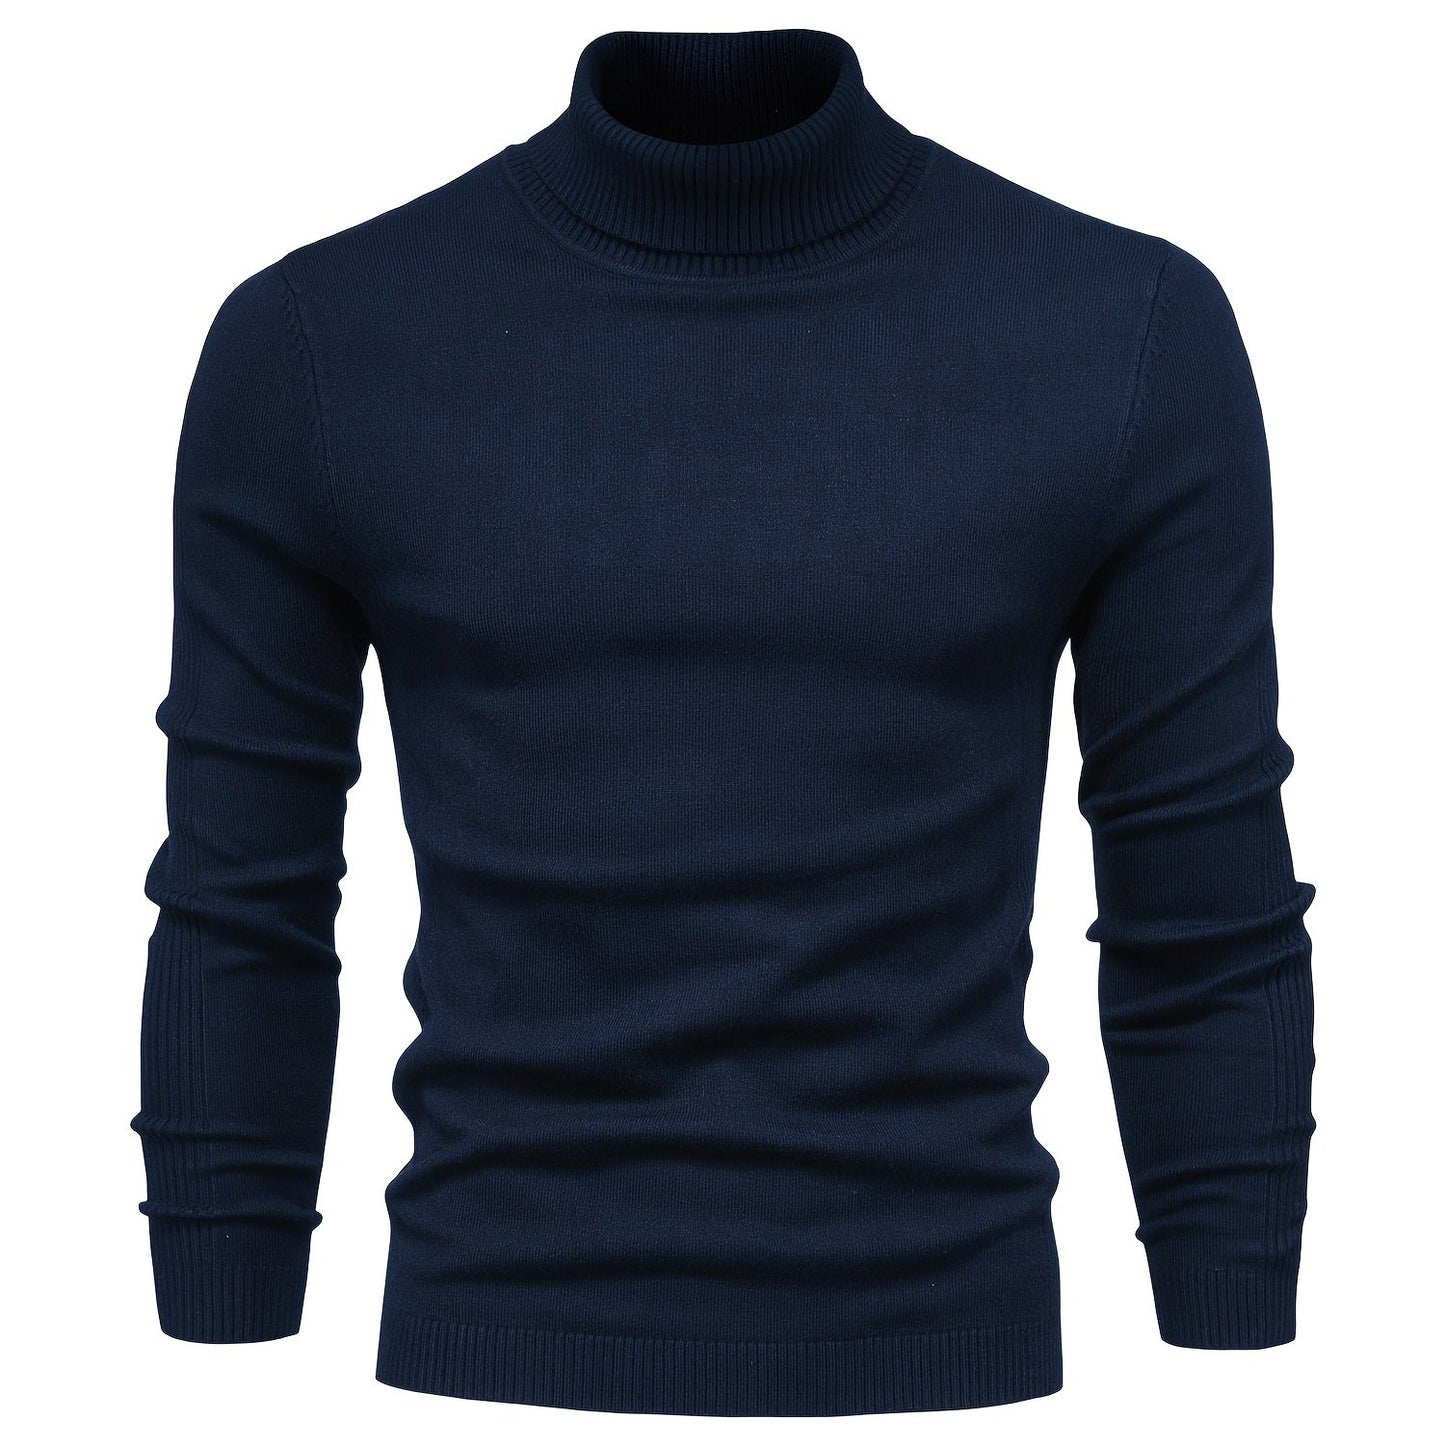 Foruwish - All Match Best Sellers Autumn Winter Pullover Men Solid Turtleneck Sweaters